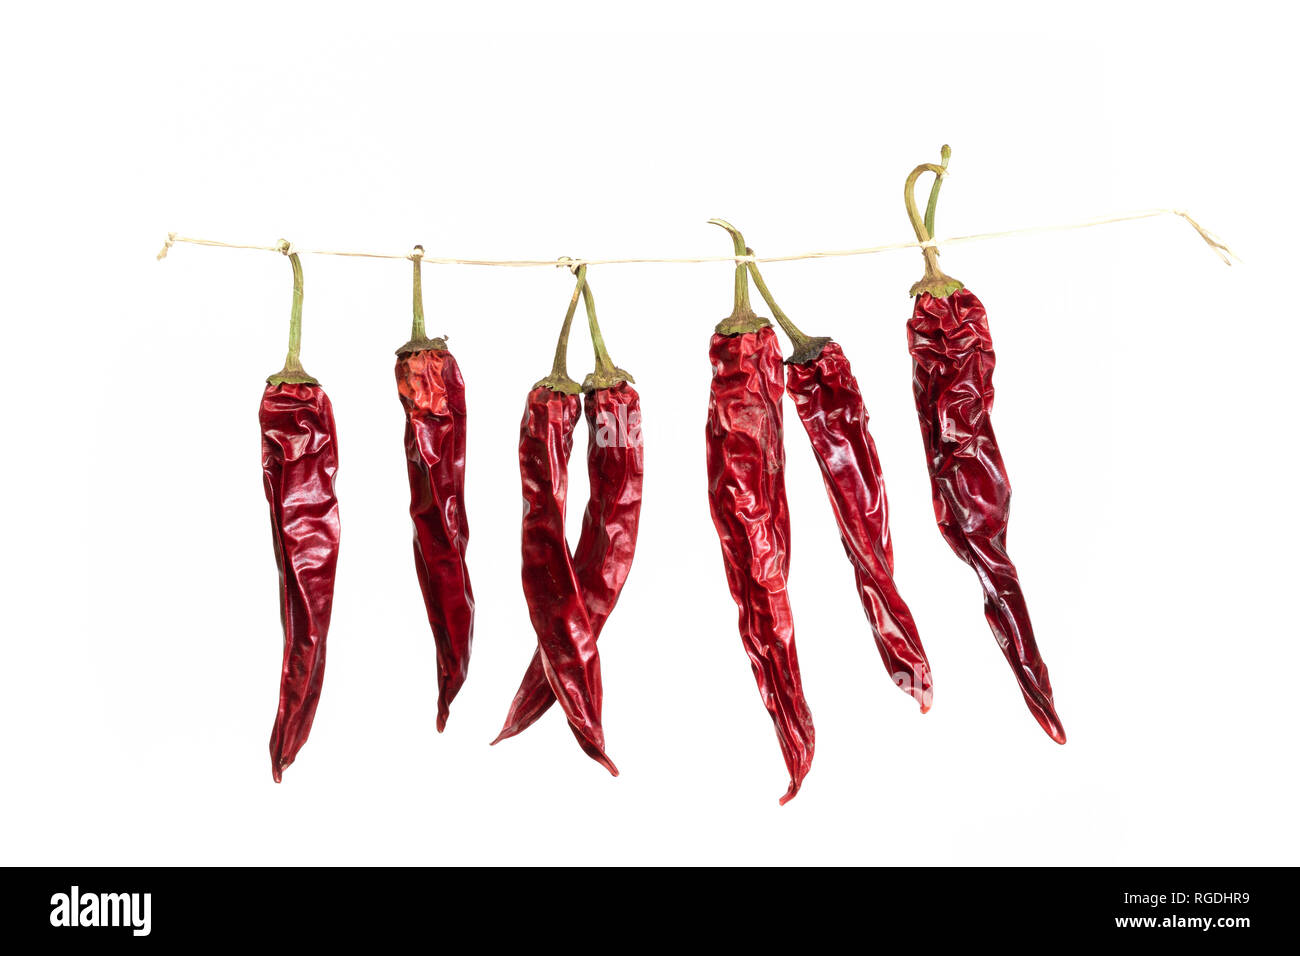 group of dried spicy chilli peppers on white background Stock Photo